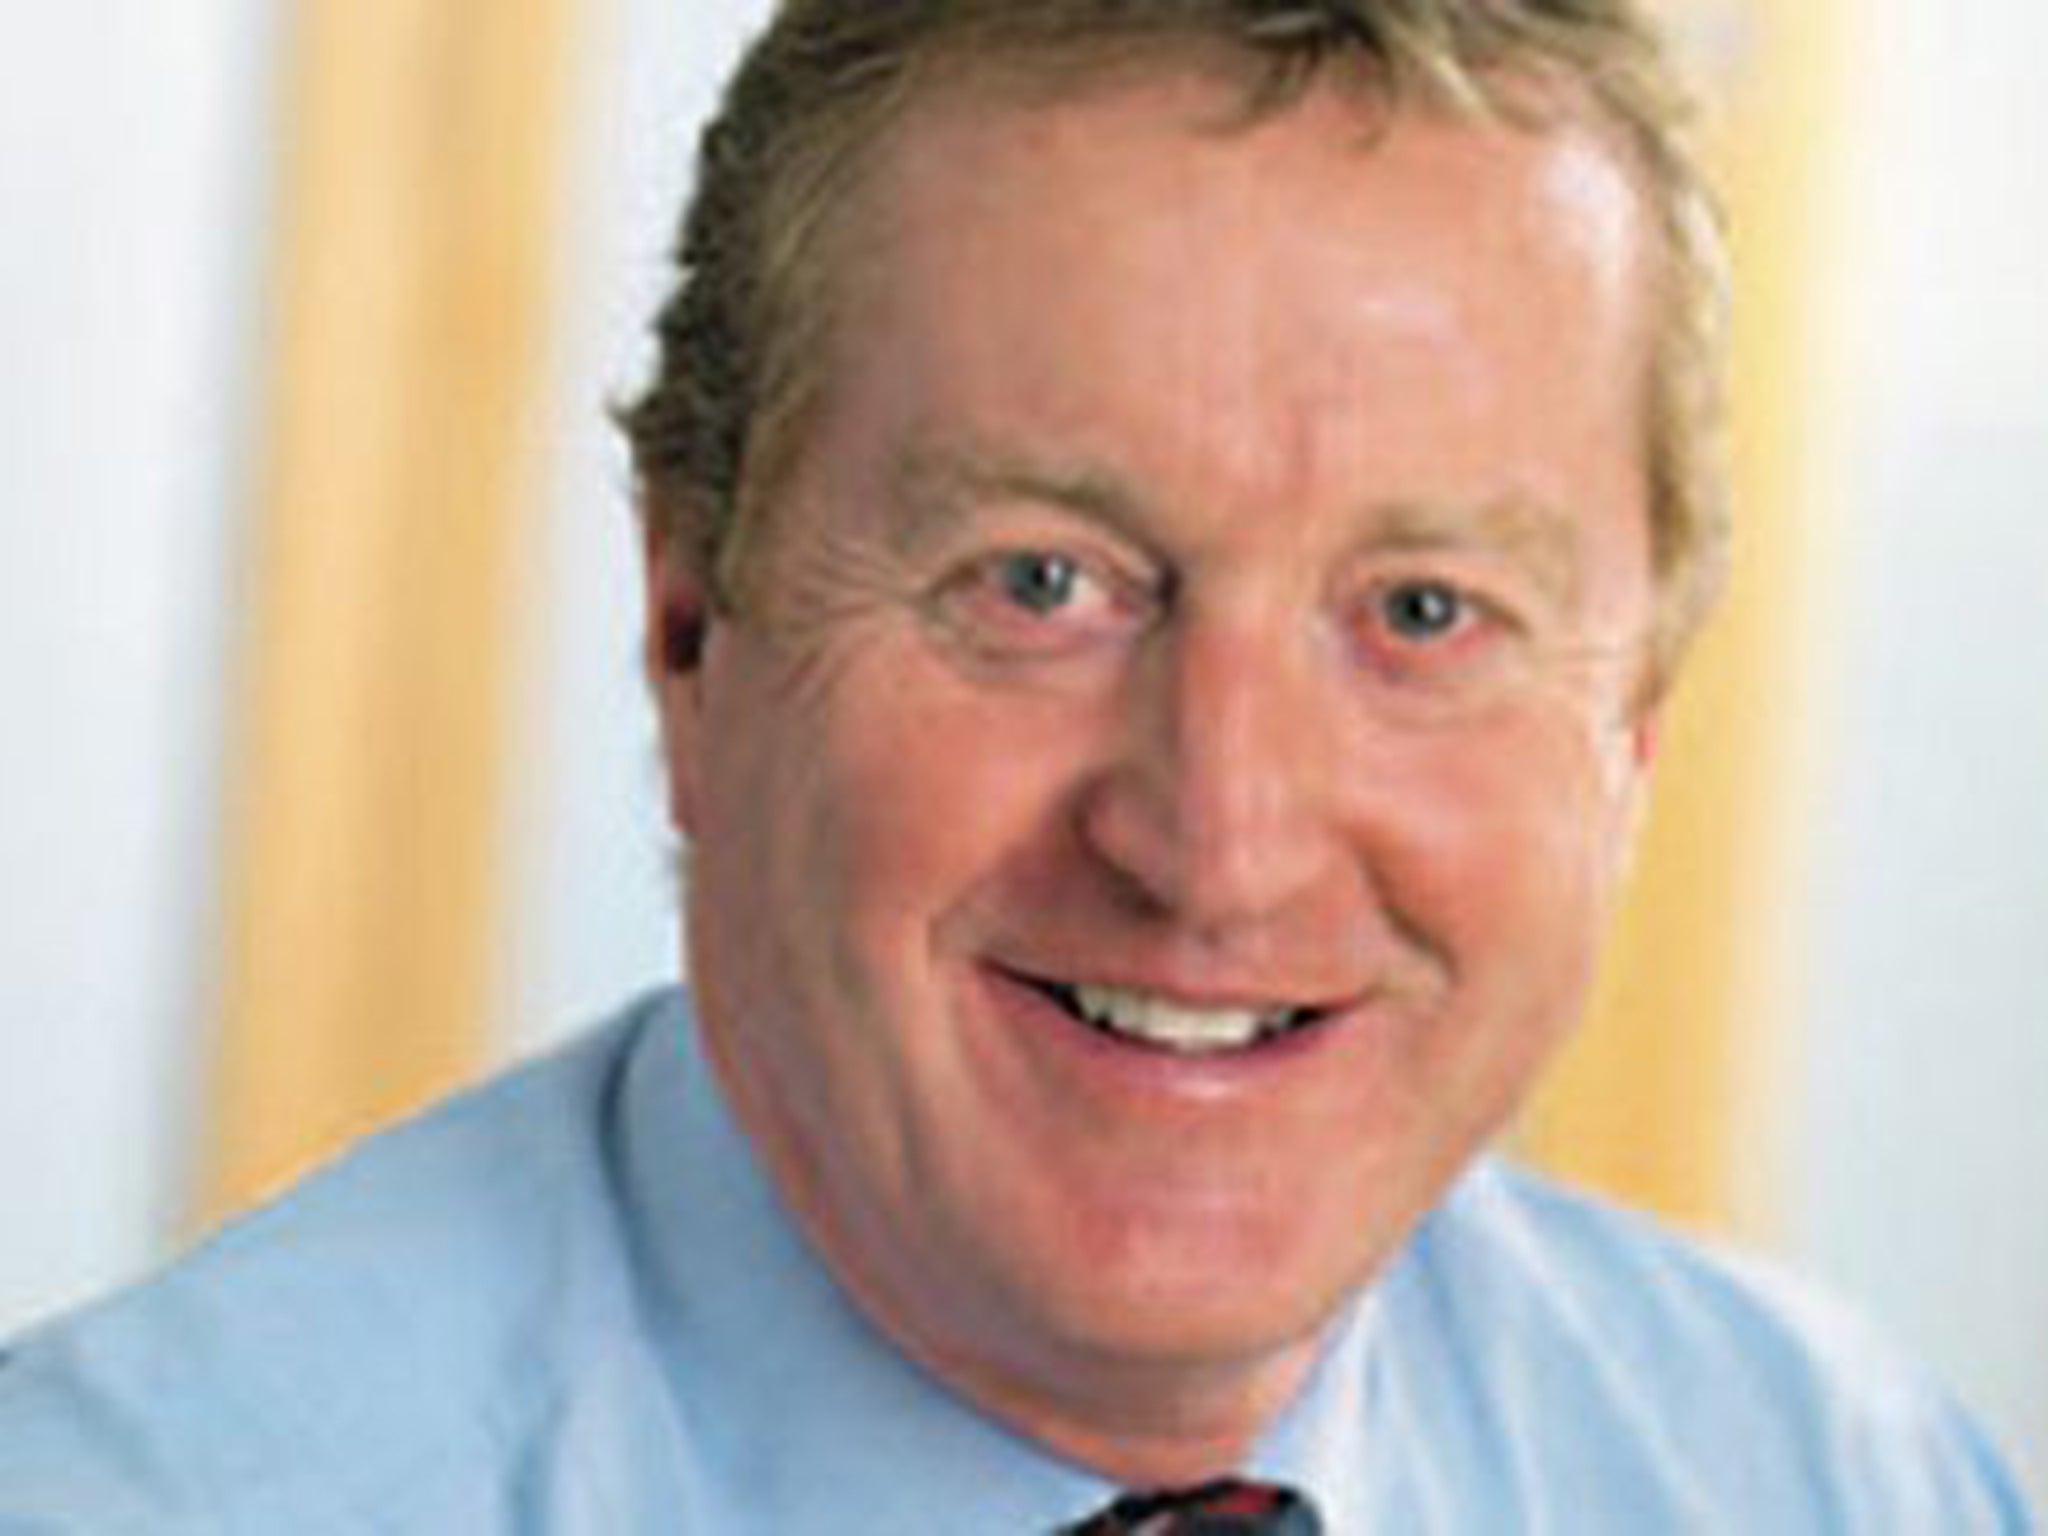 Mr Longdon has worked for Aveva for three decades and was at its helm for 17 years